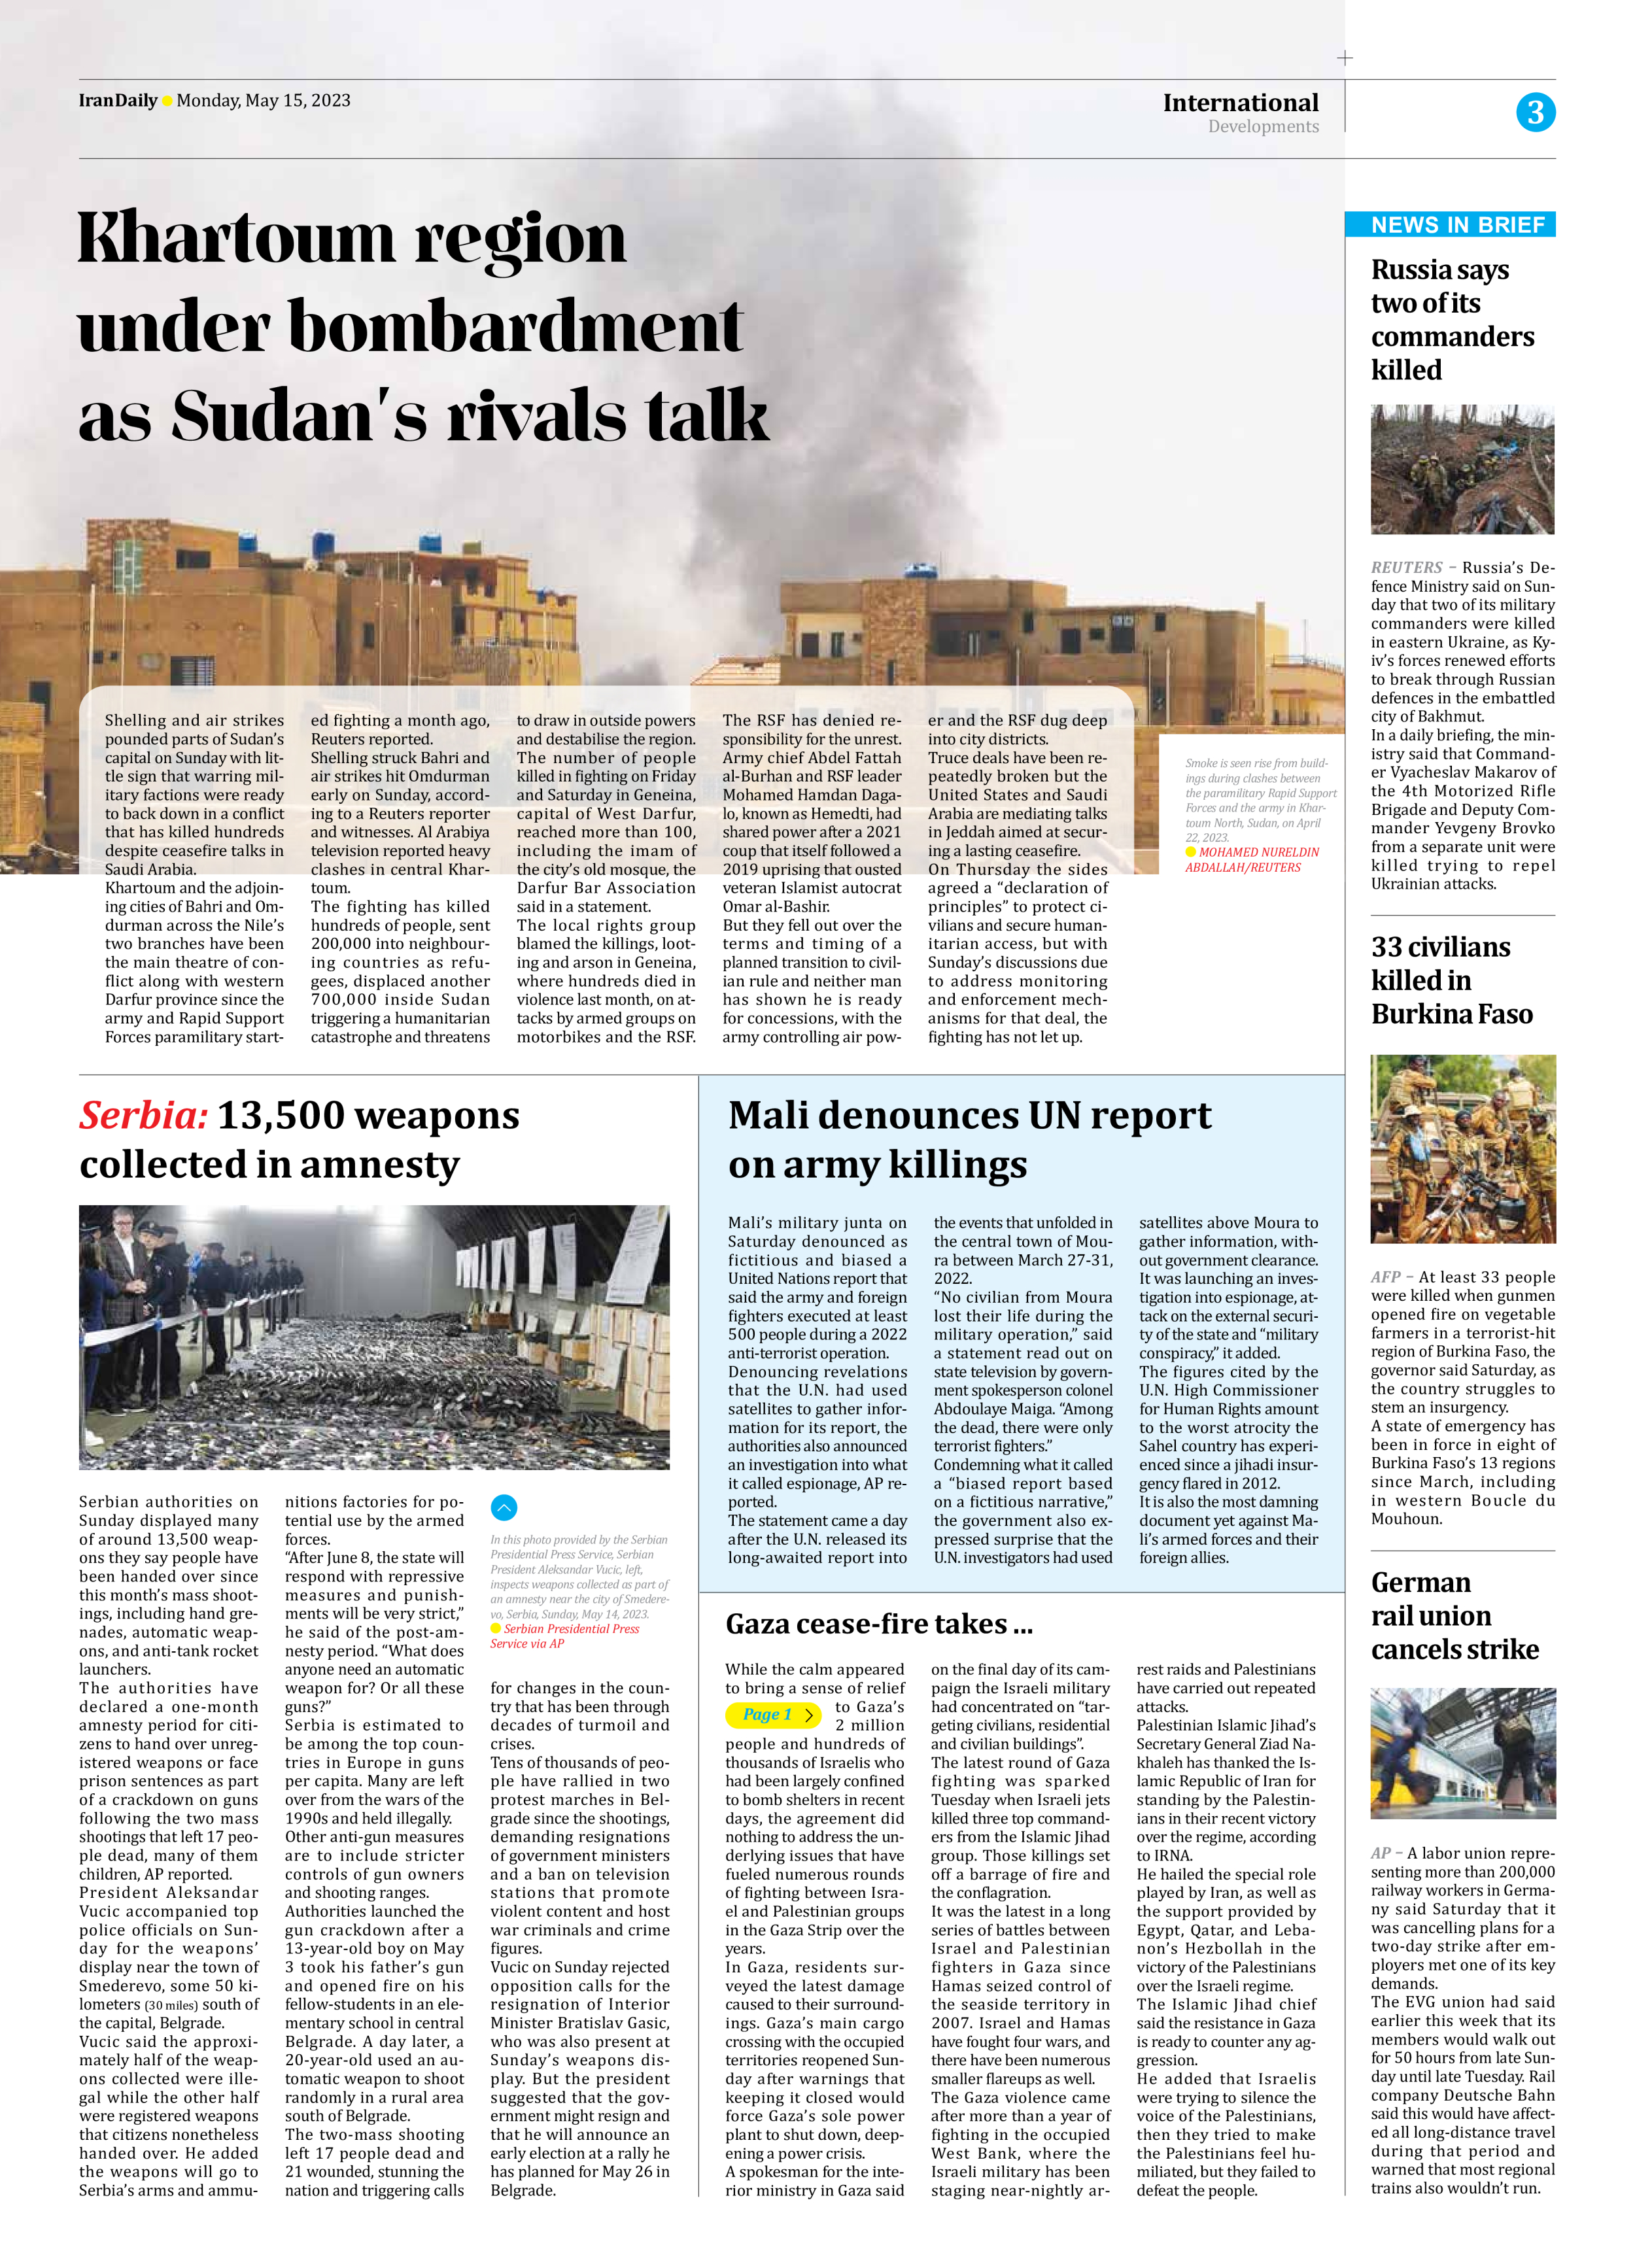 Iran Daily - Number Seven Thousand Two Hundred and Ninety Two - 15 May 2023 - Page 3